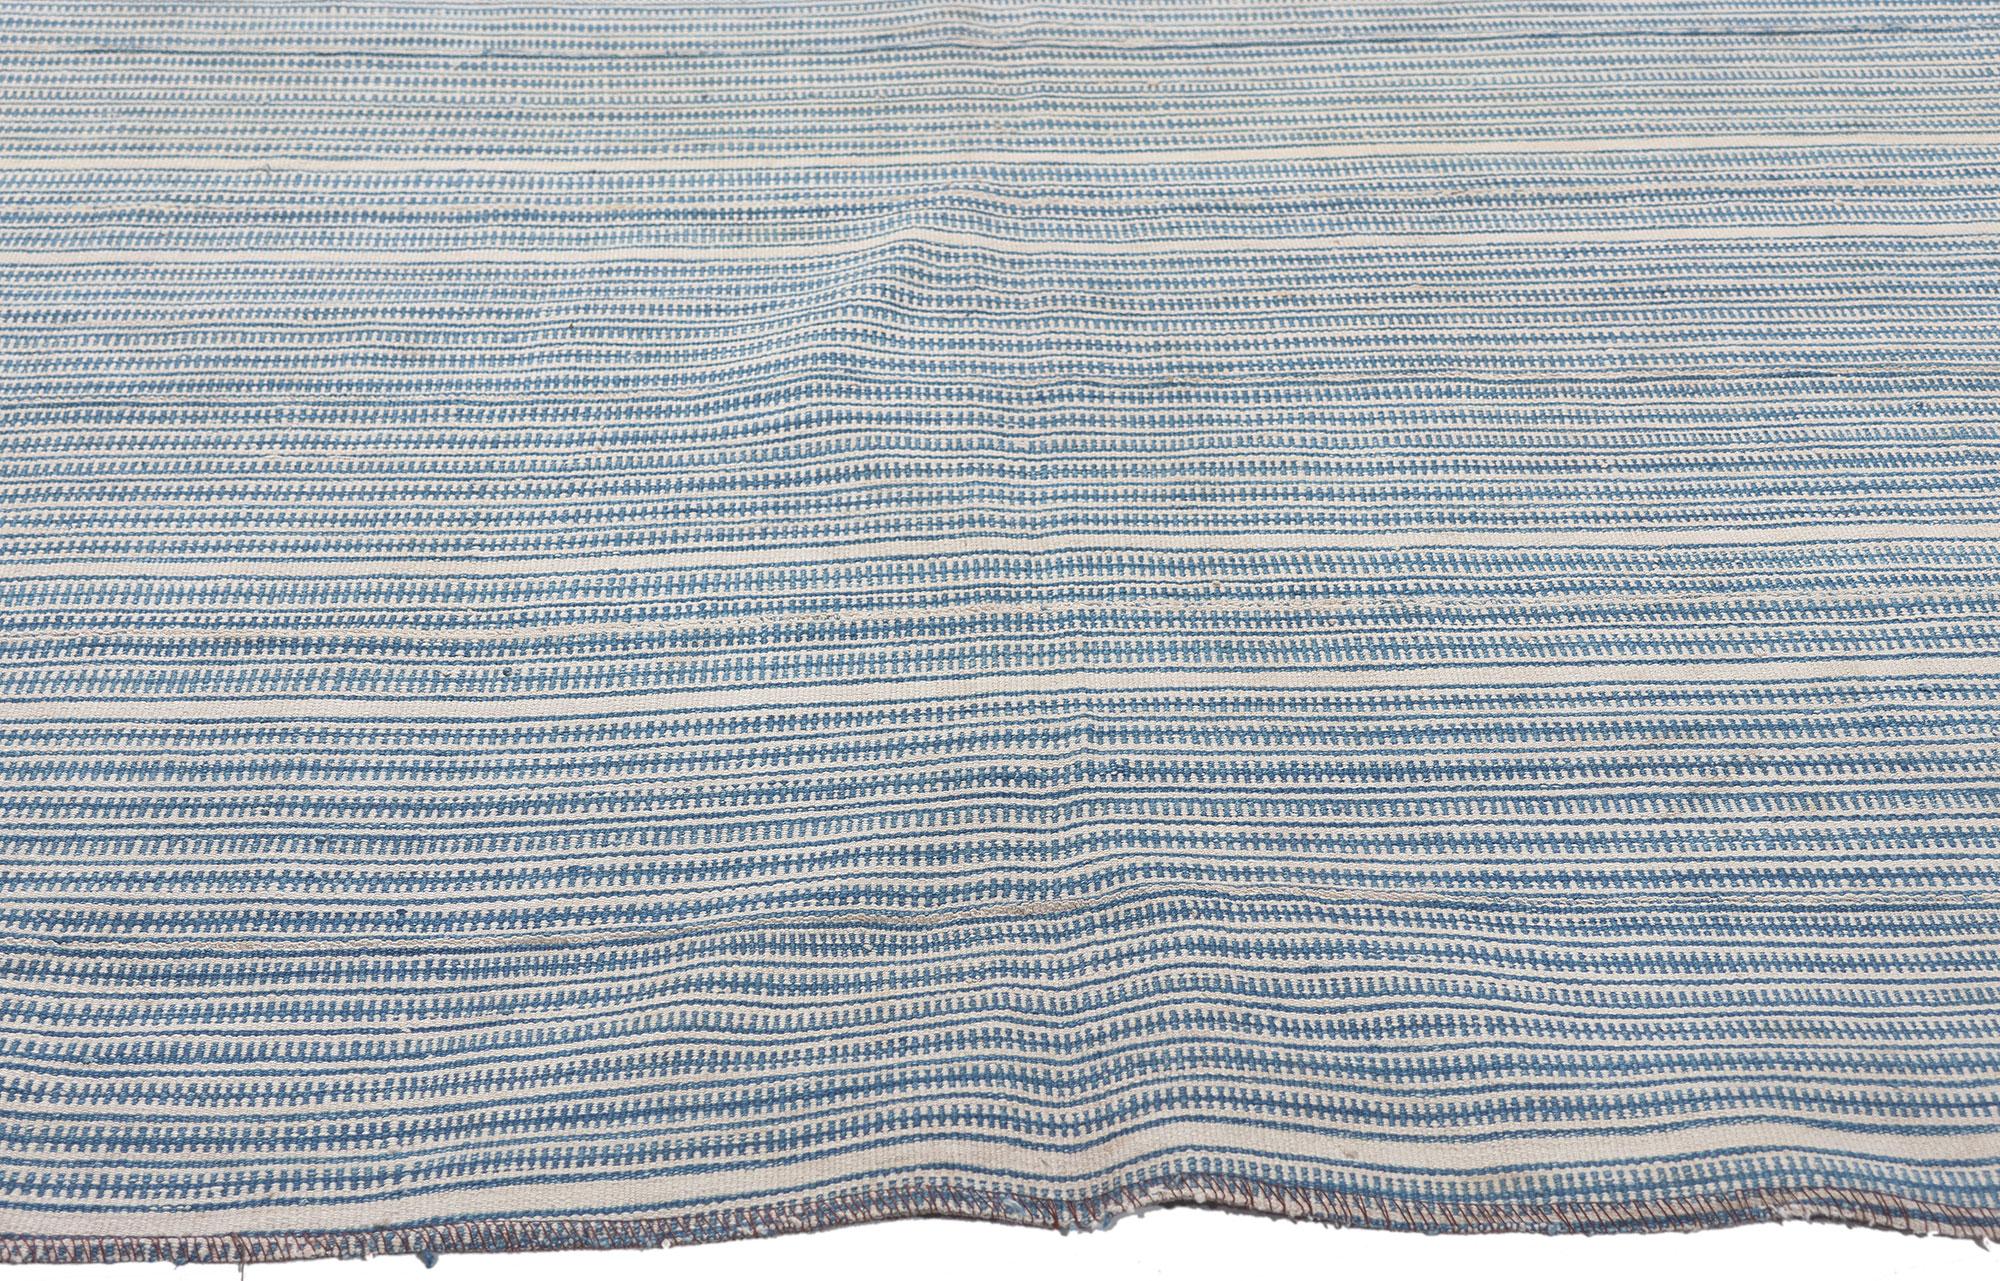 Hand-Woven Blue and Ivory Crosshatch Stripe Kilim Rug, Casually Chic Coastal Style